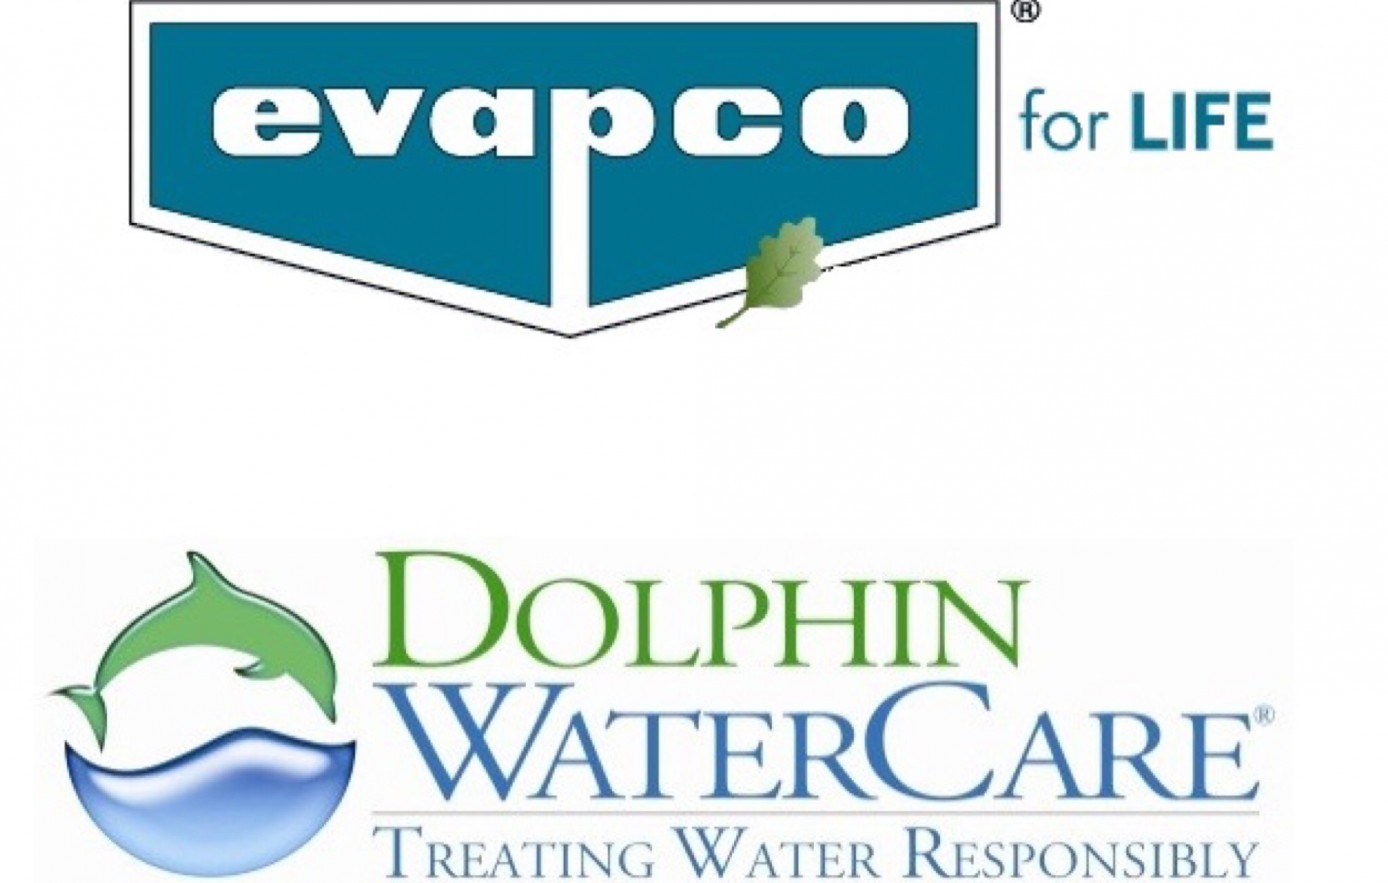 EVAPCO and Dolphin WaterCare logos